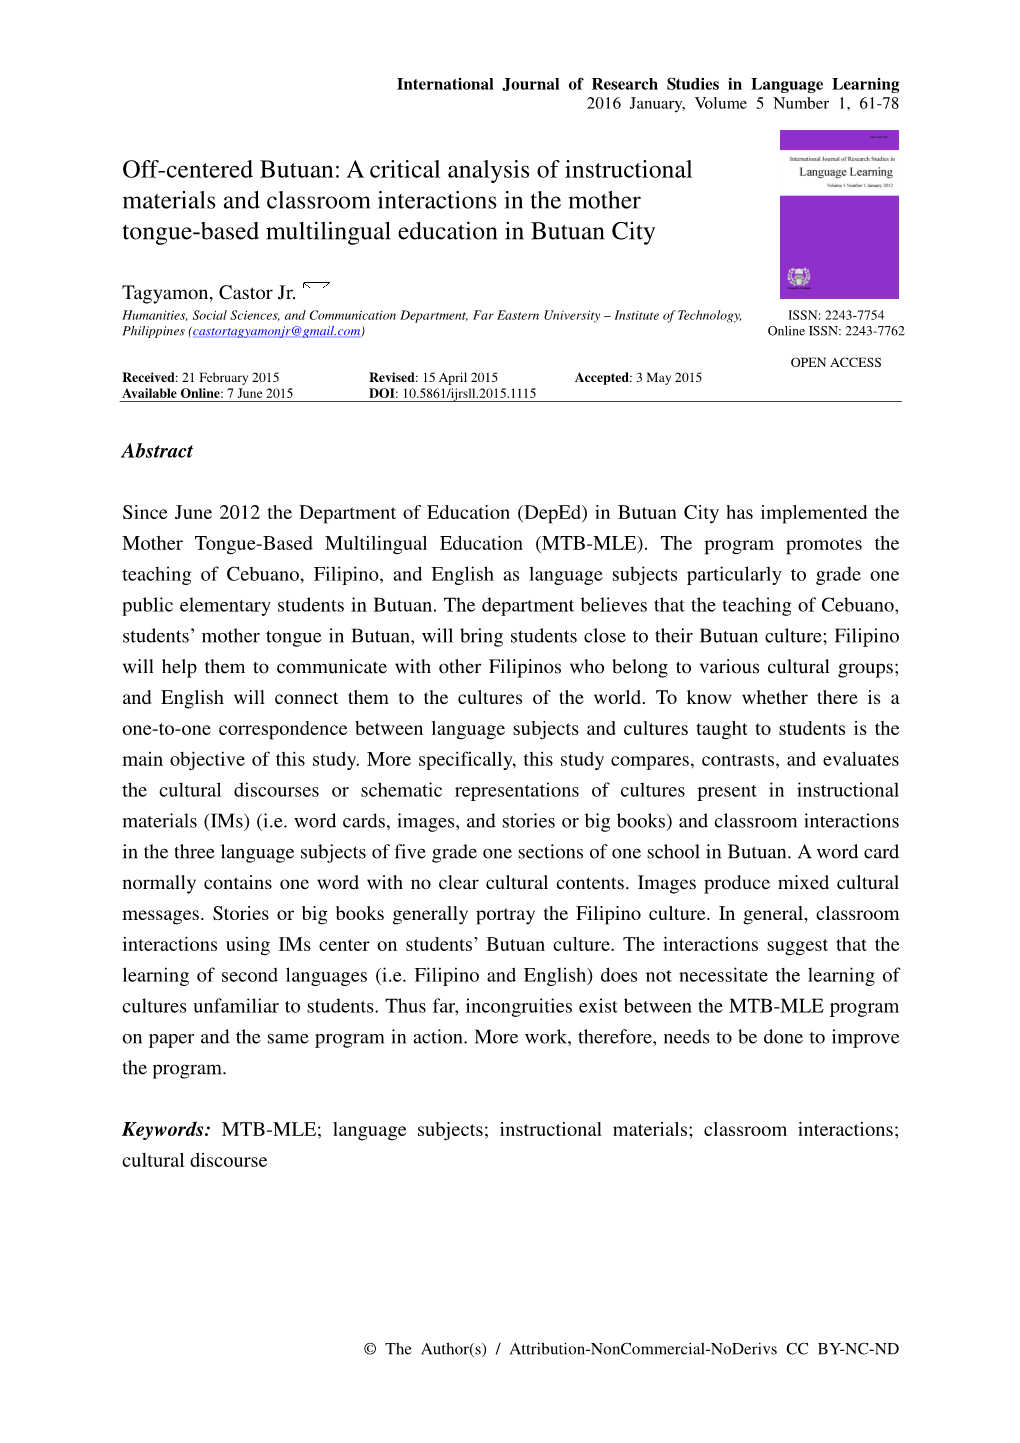 Off-Centered Butuan: a Critical Analysis of Instructional Materials and Classroom Interactions in the Mother Tongue-Based Multilingual Education in Butuan City